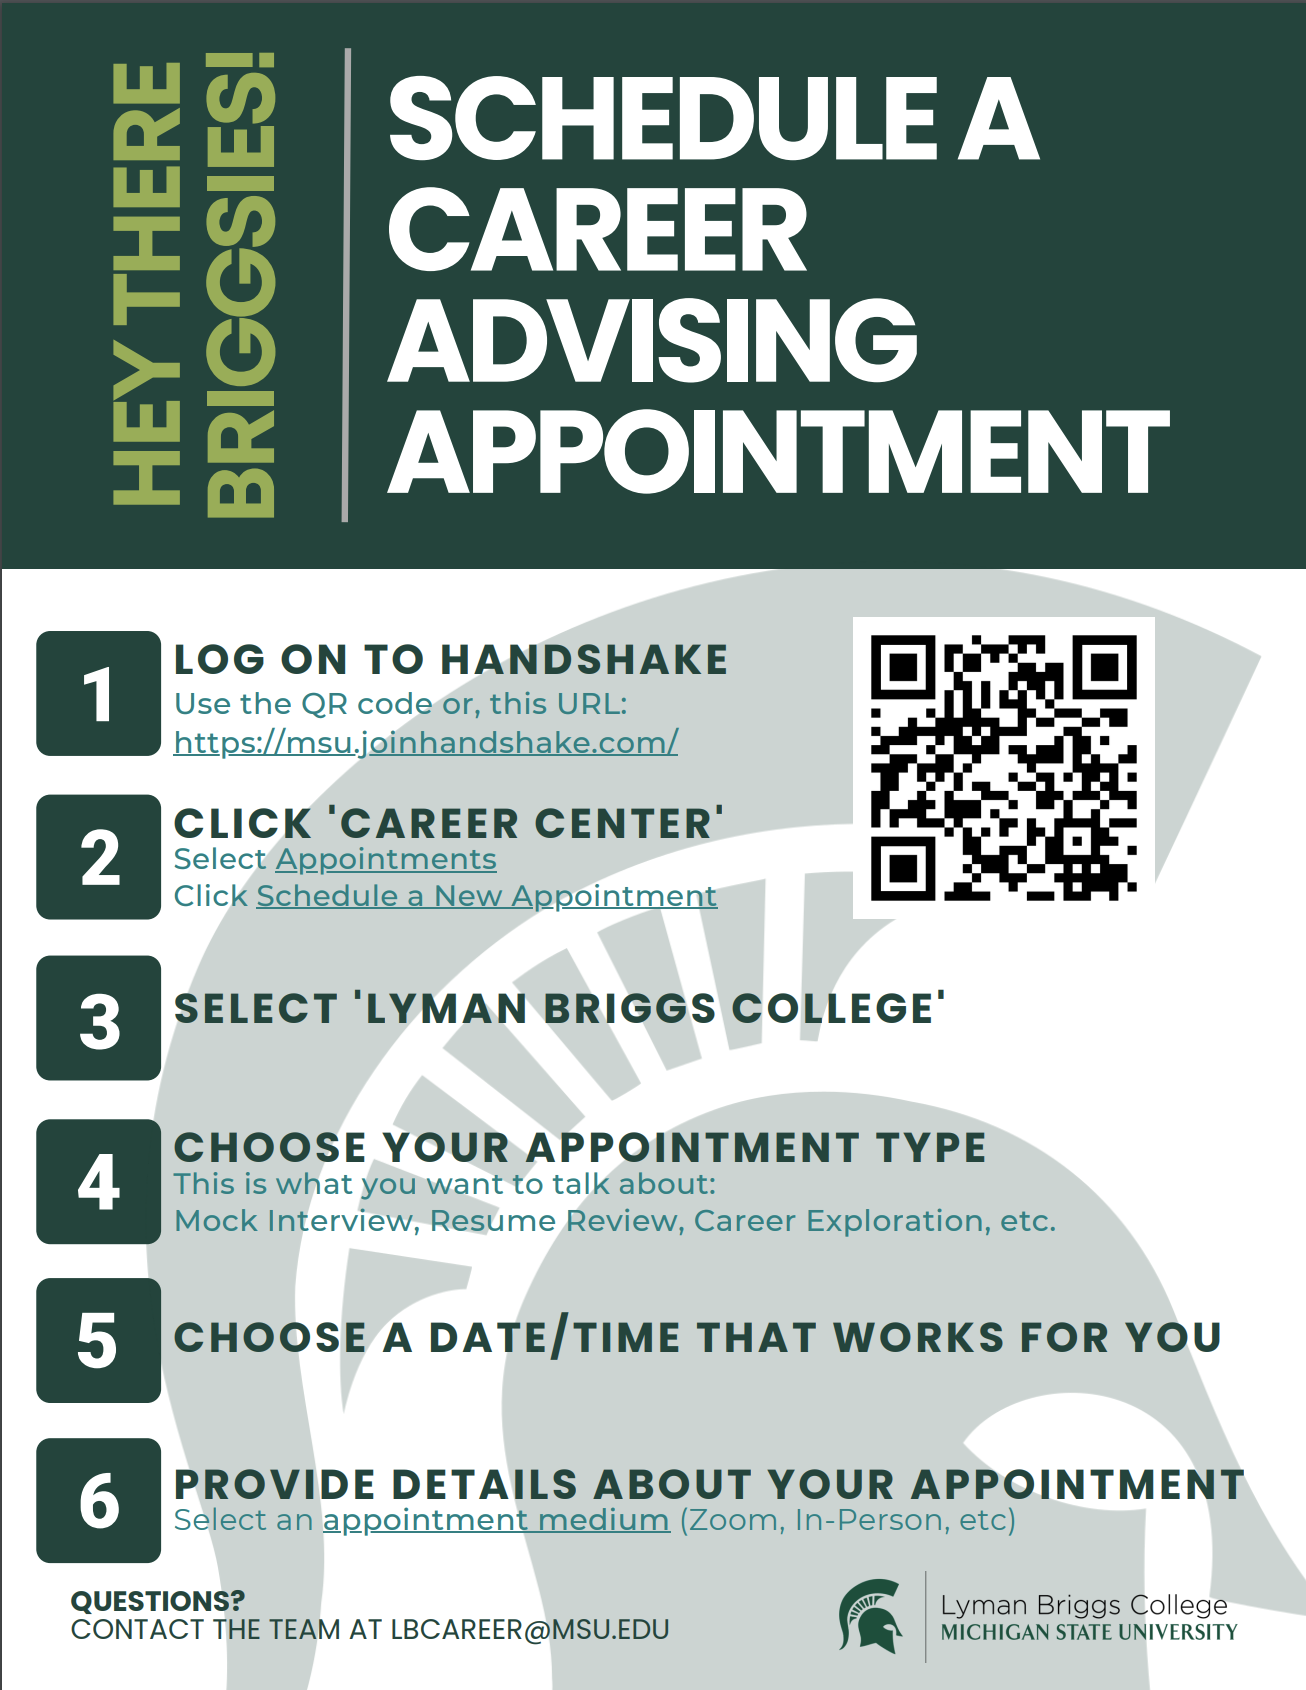 Schedule a Career Advising Appointment